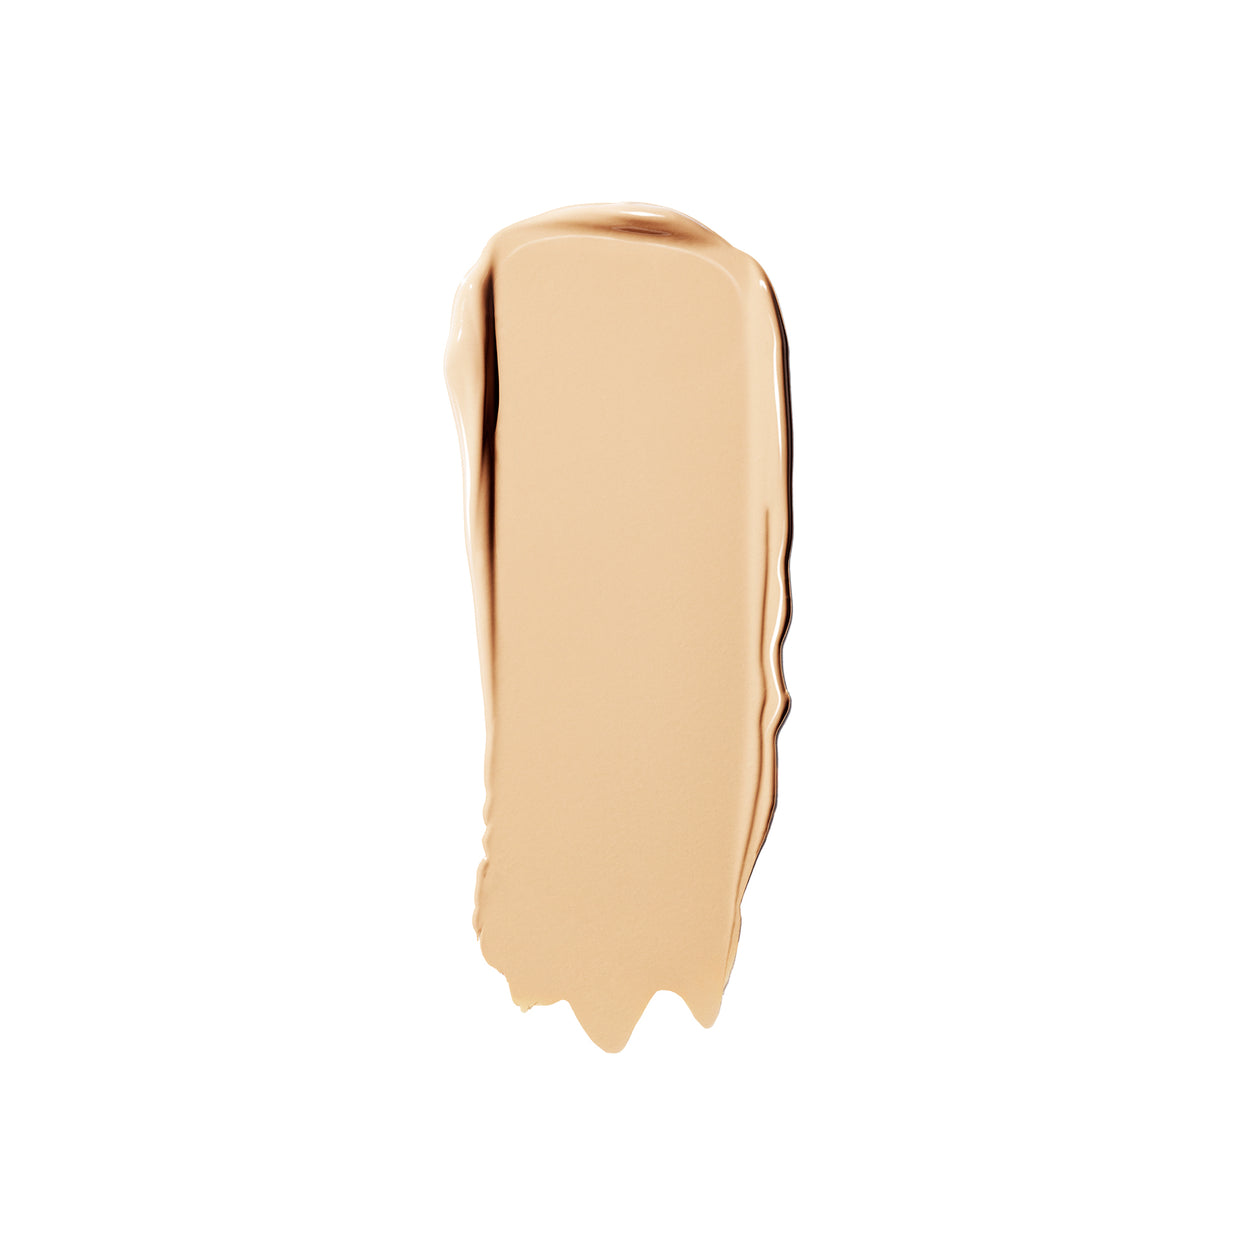 Revealer Super Creamy + Brightening Concealer with Caffeine and Hyaluronic Acid